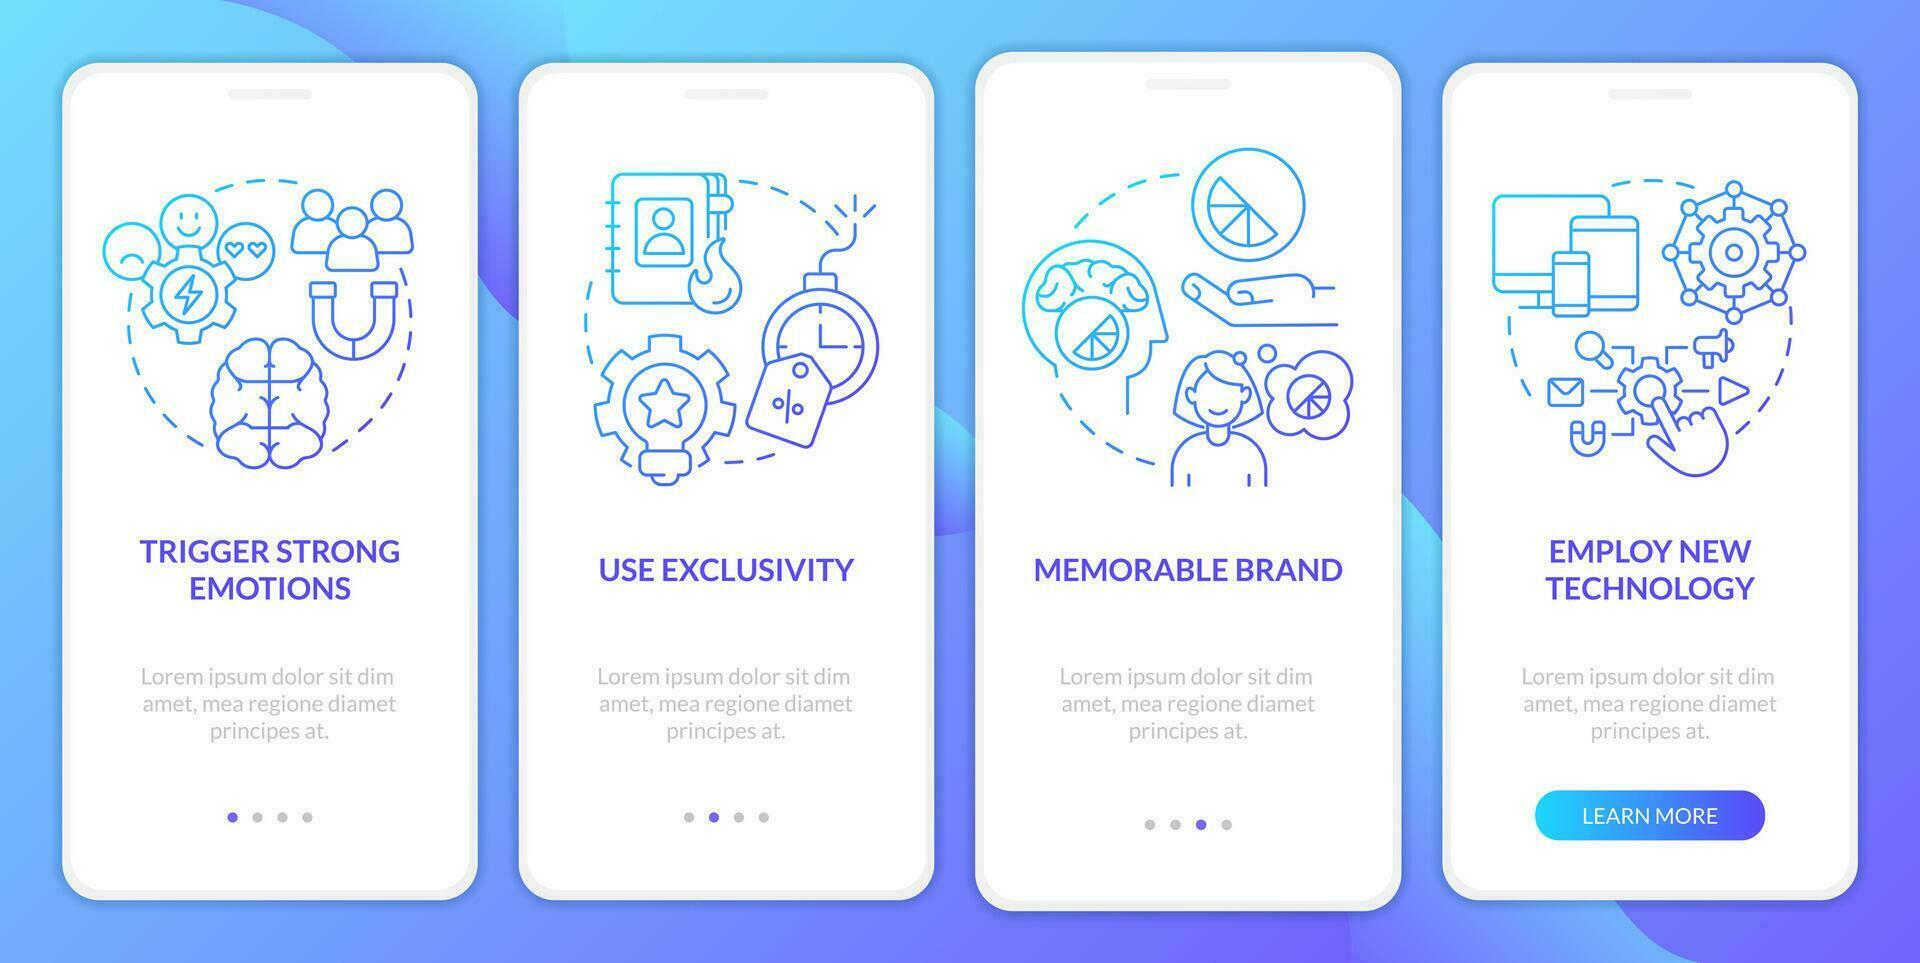 Clients emotions management blue gradient onboarding mobile app screen. Walkthrough 4 steps graphic instructions with linear concepts. UI, UX, GUI templated vector